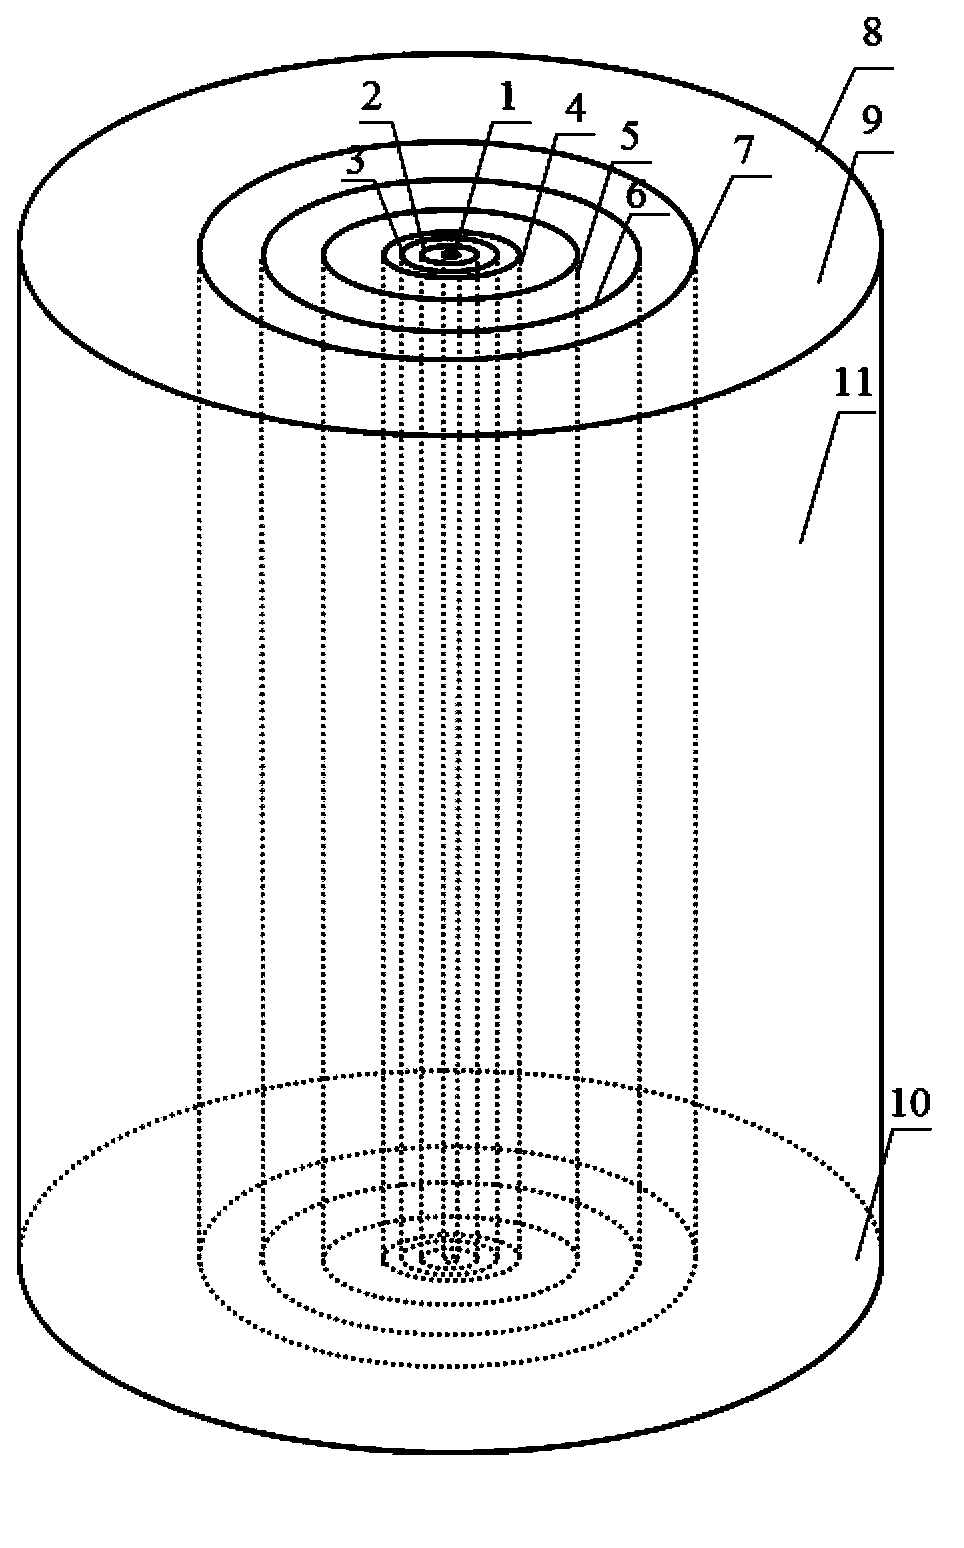 Detection performance testing device of array sensing well detection instrument